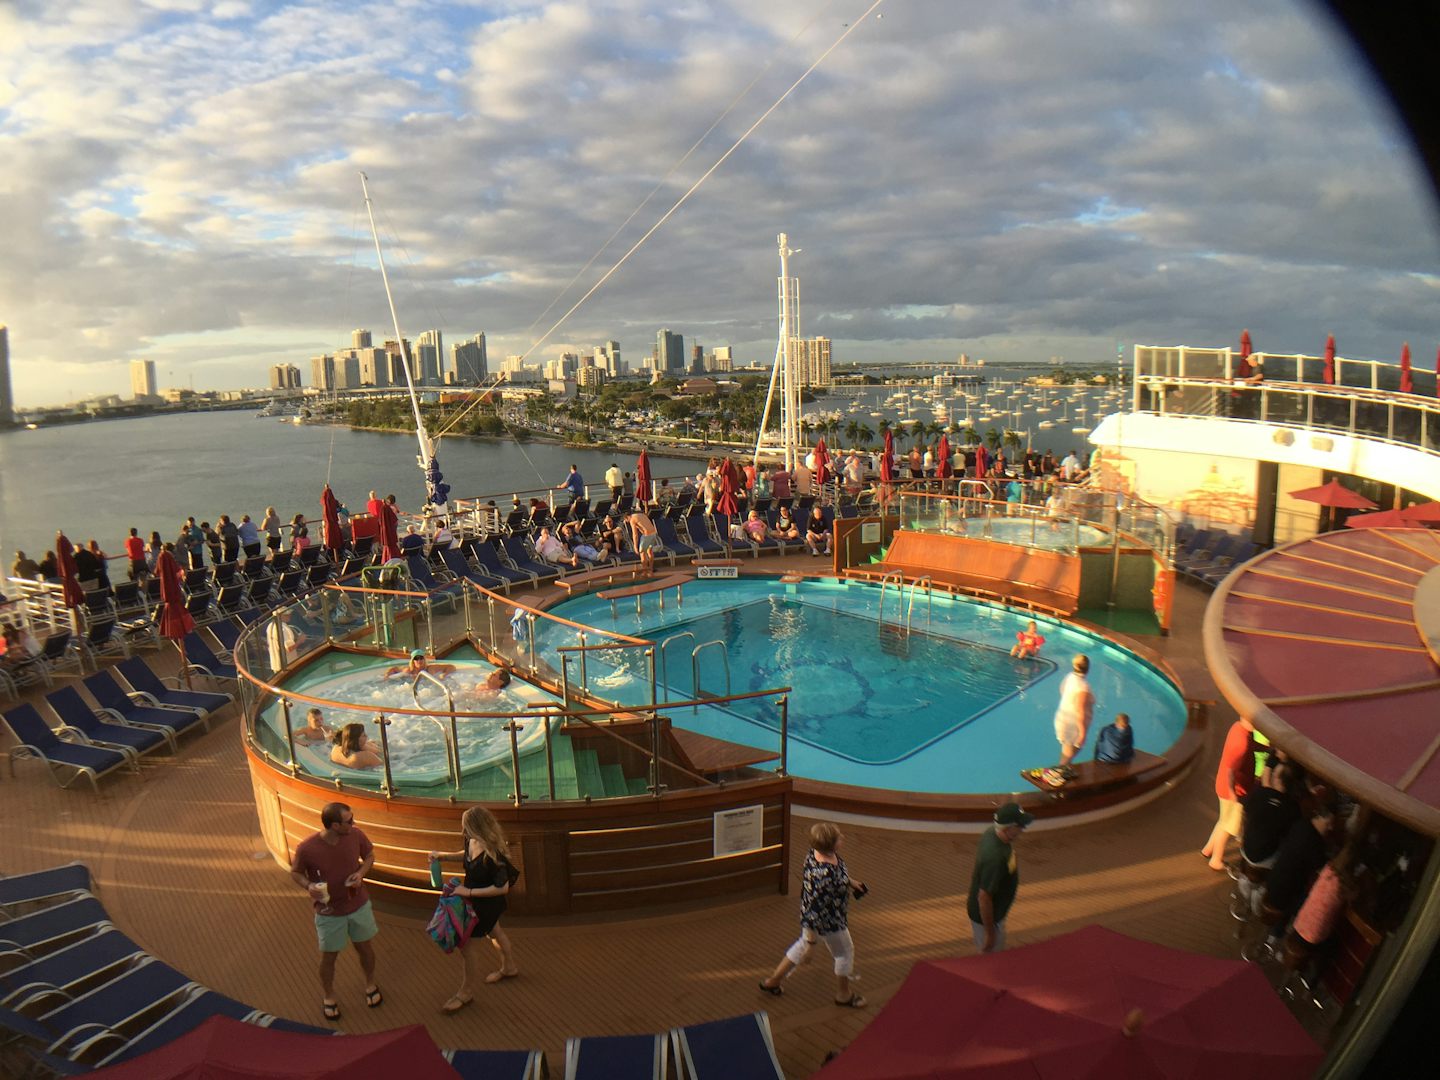 The Aft pool on Lido Deck